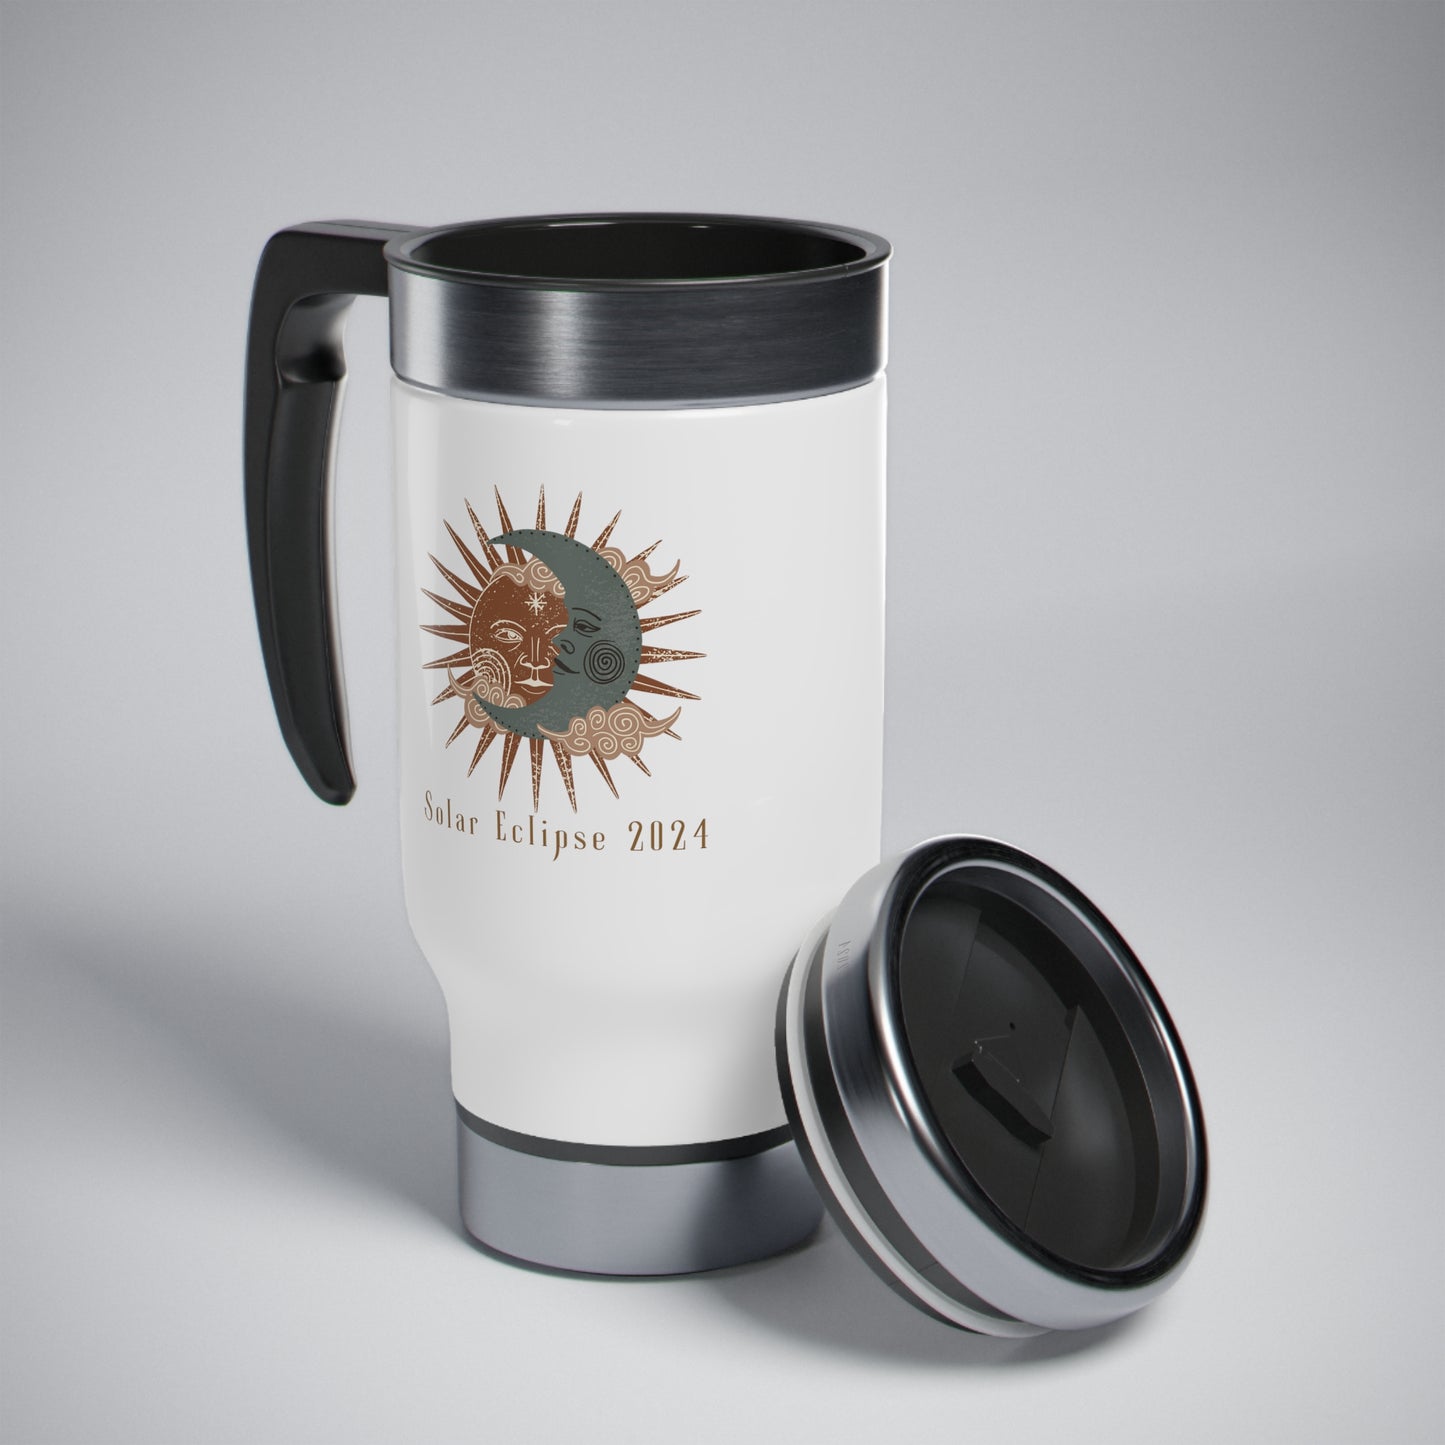 Solar Eclipse Stainless Steel Travel Mug with Handle, 14oz